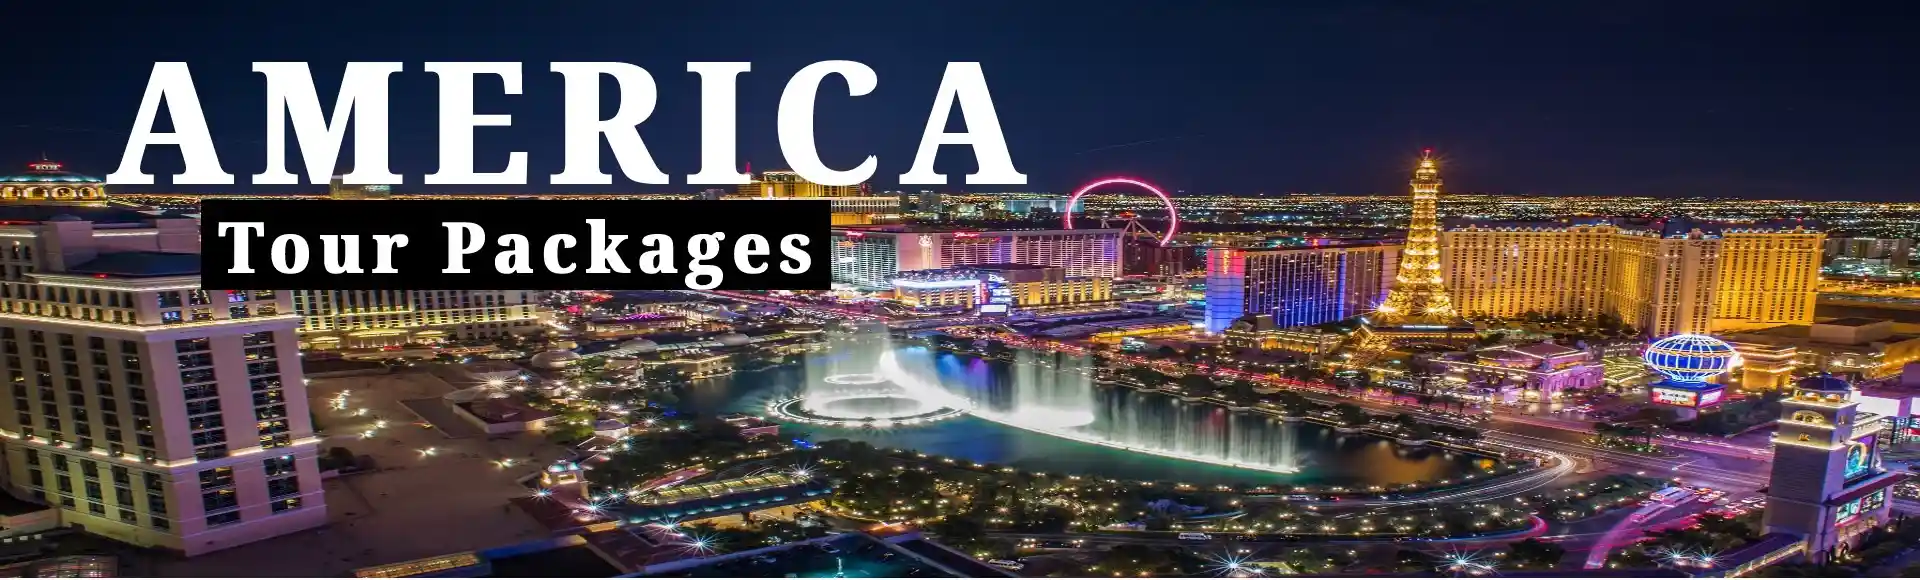 America tours packages